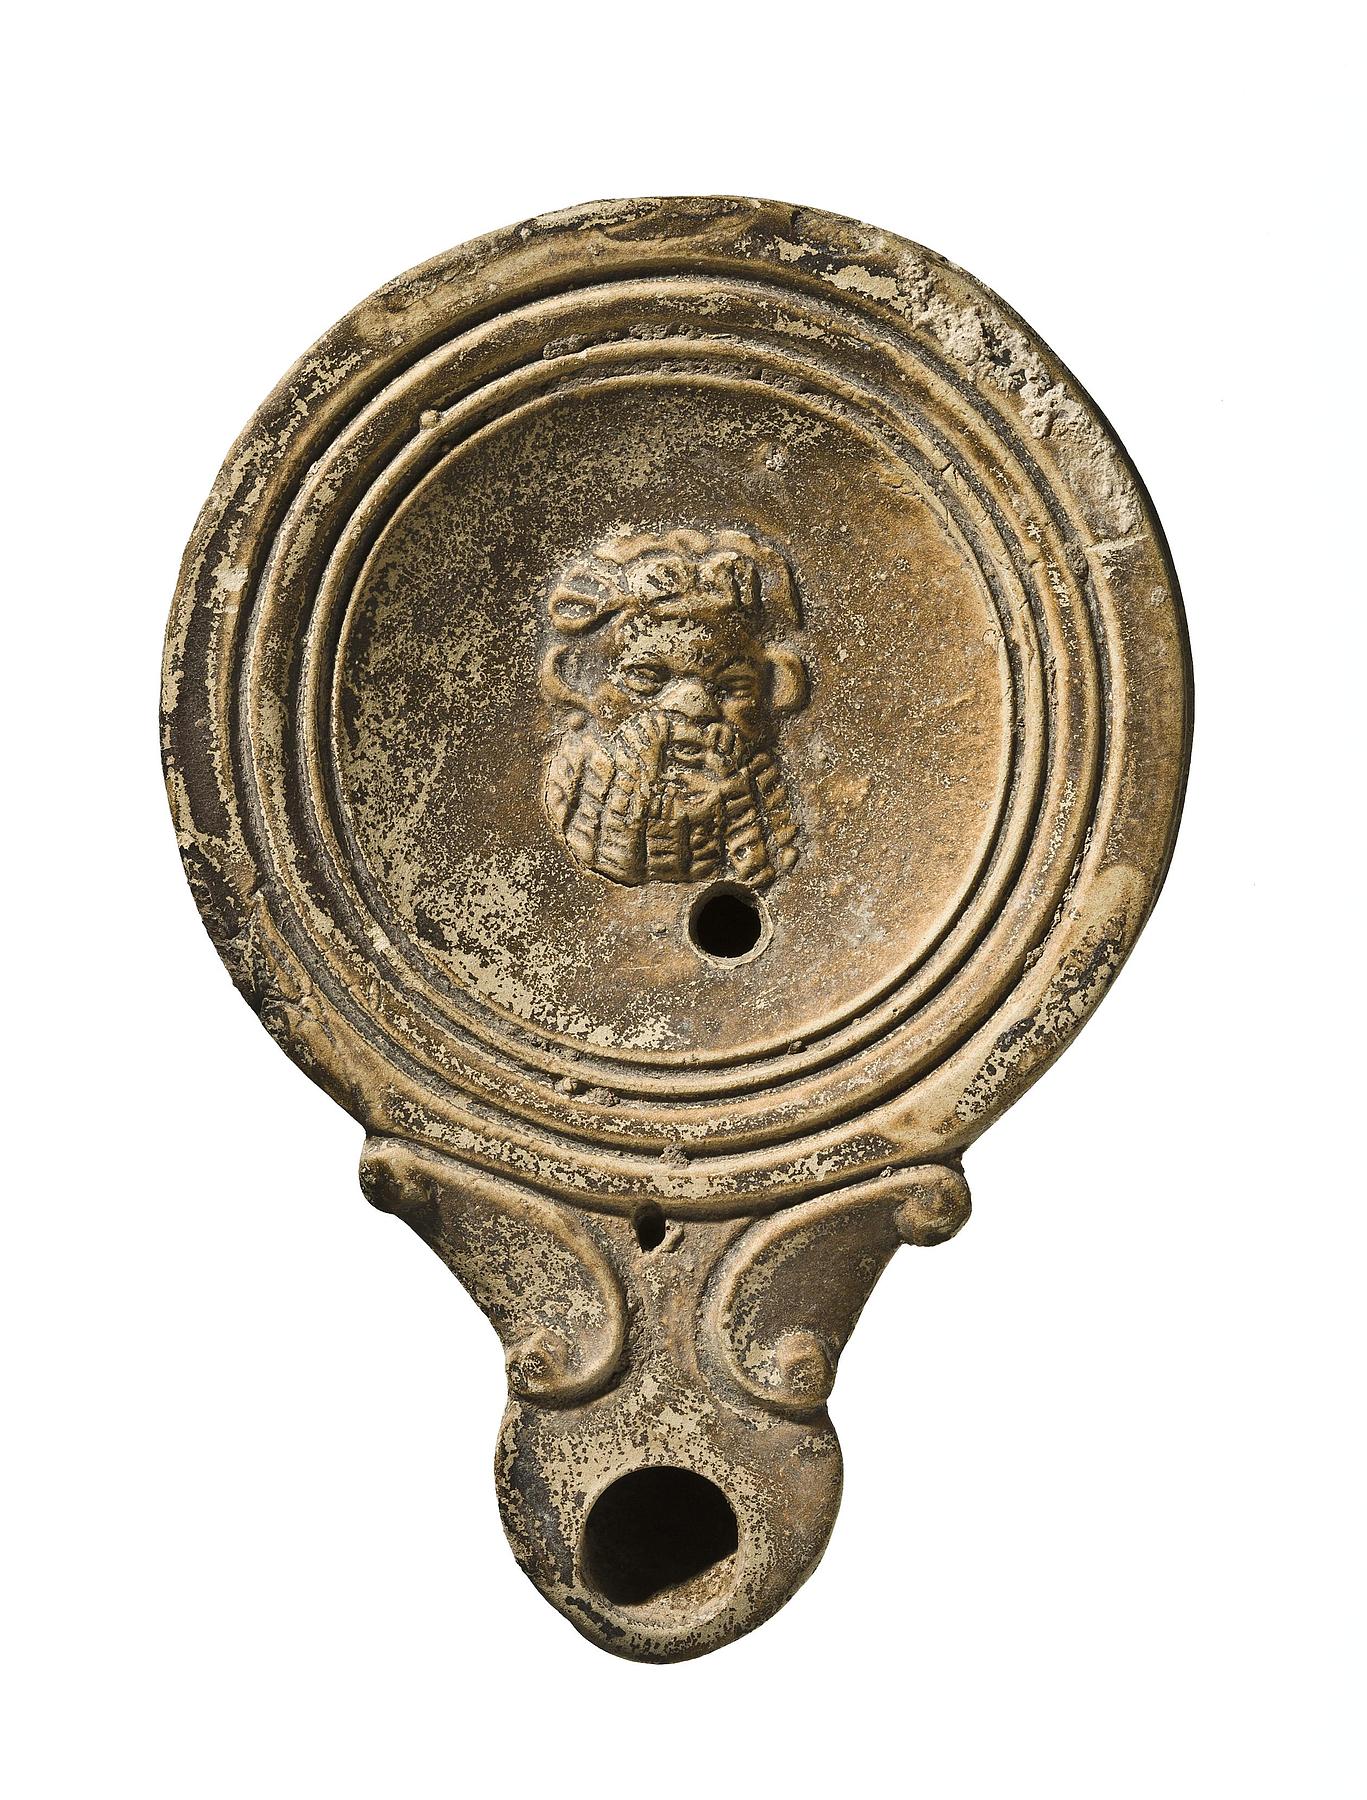 Lamp with a silenus mask, H1202